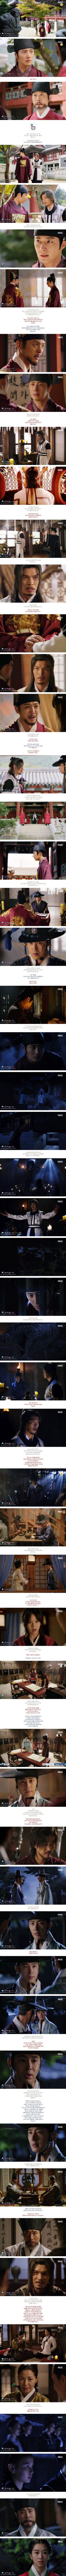 episode 13 captures for the Korean drama 'The Night Watchman's Journal'